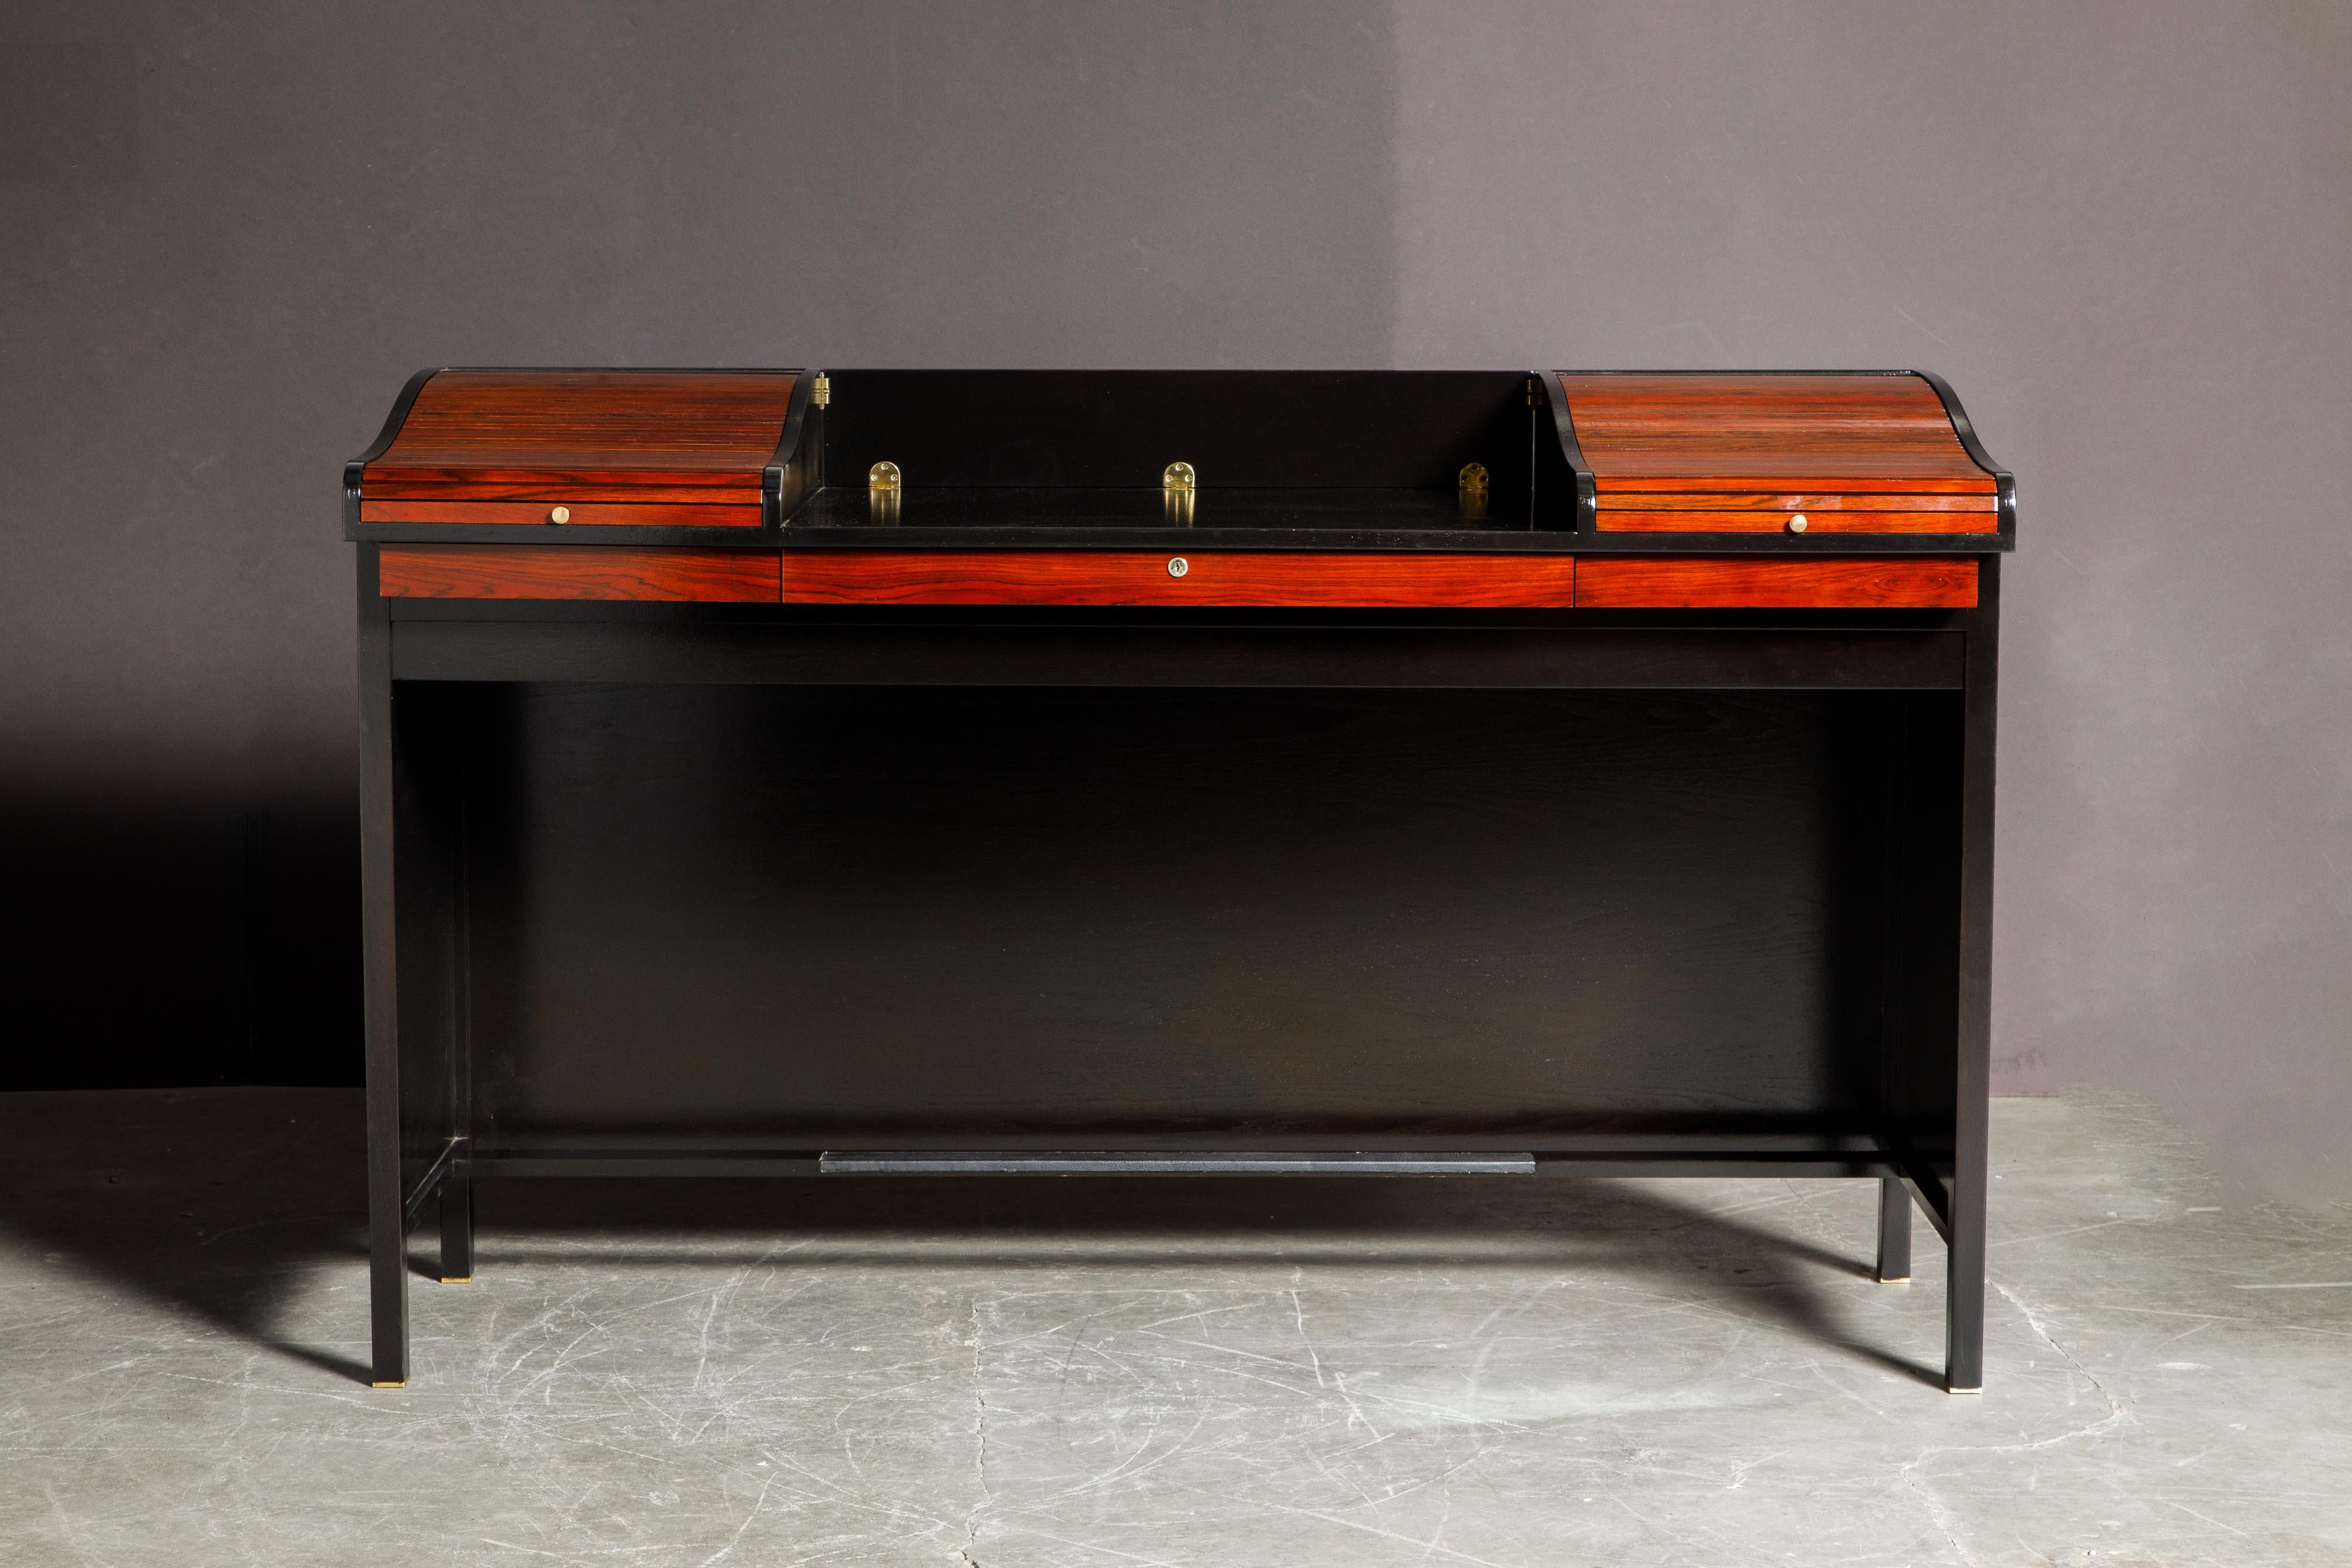 This spectacular fully restored and sought-after model #452 'Roll Top' desk was designed by Edward Wormley for Dunbar and features beautifully grained Rosewood and Ebonized Mahogany, designed and made in the 1960s. Most examples of this design are